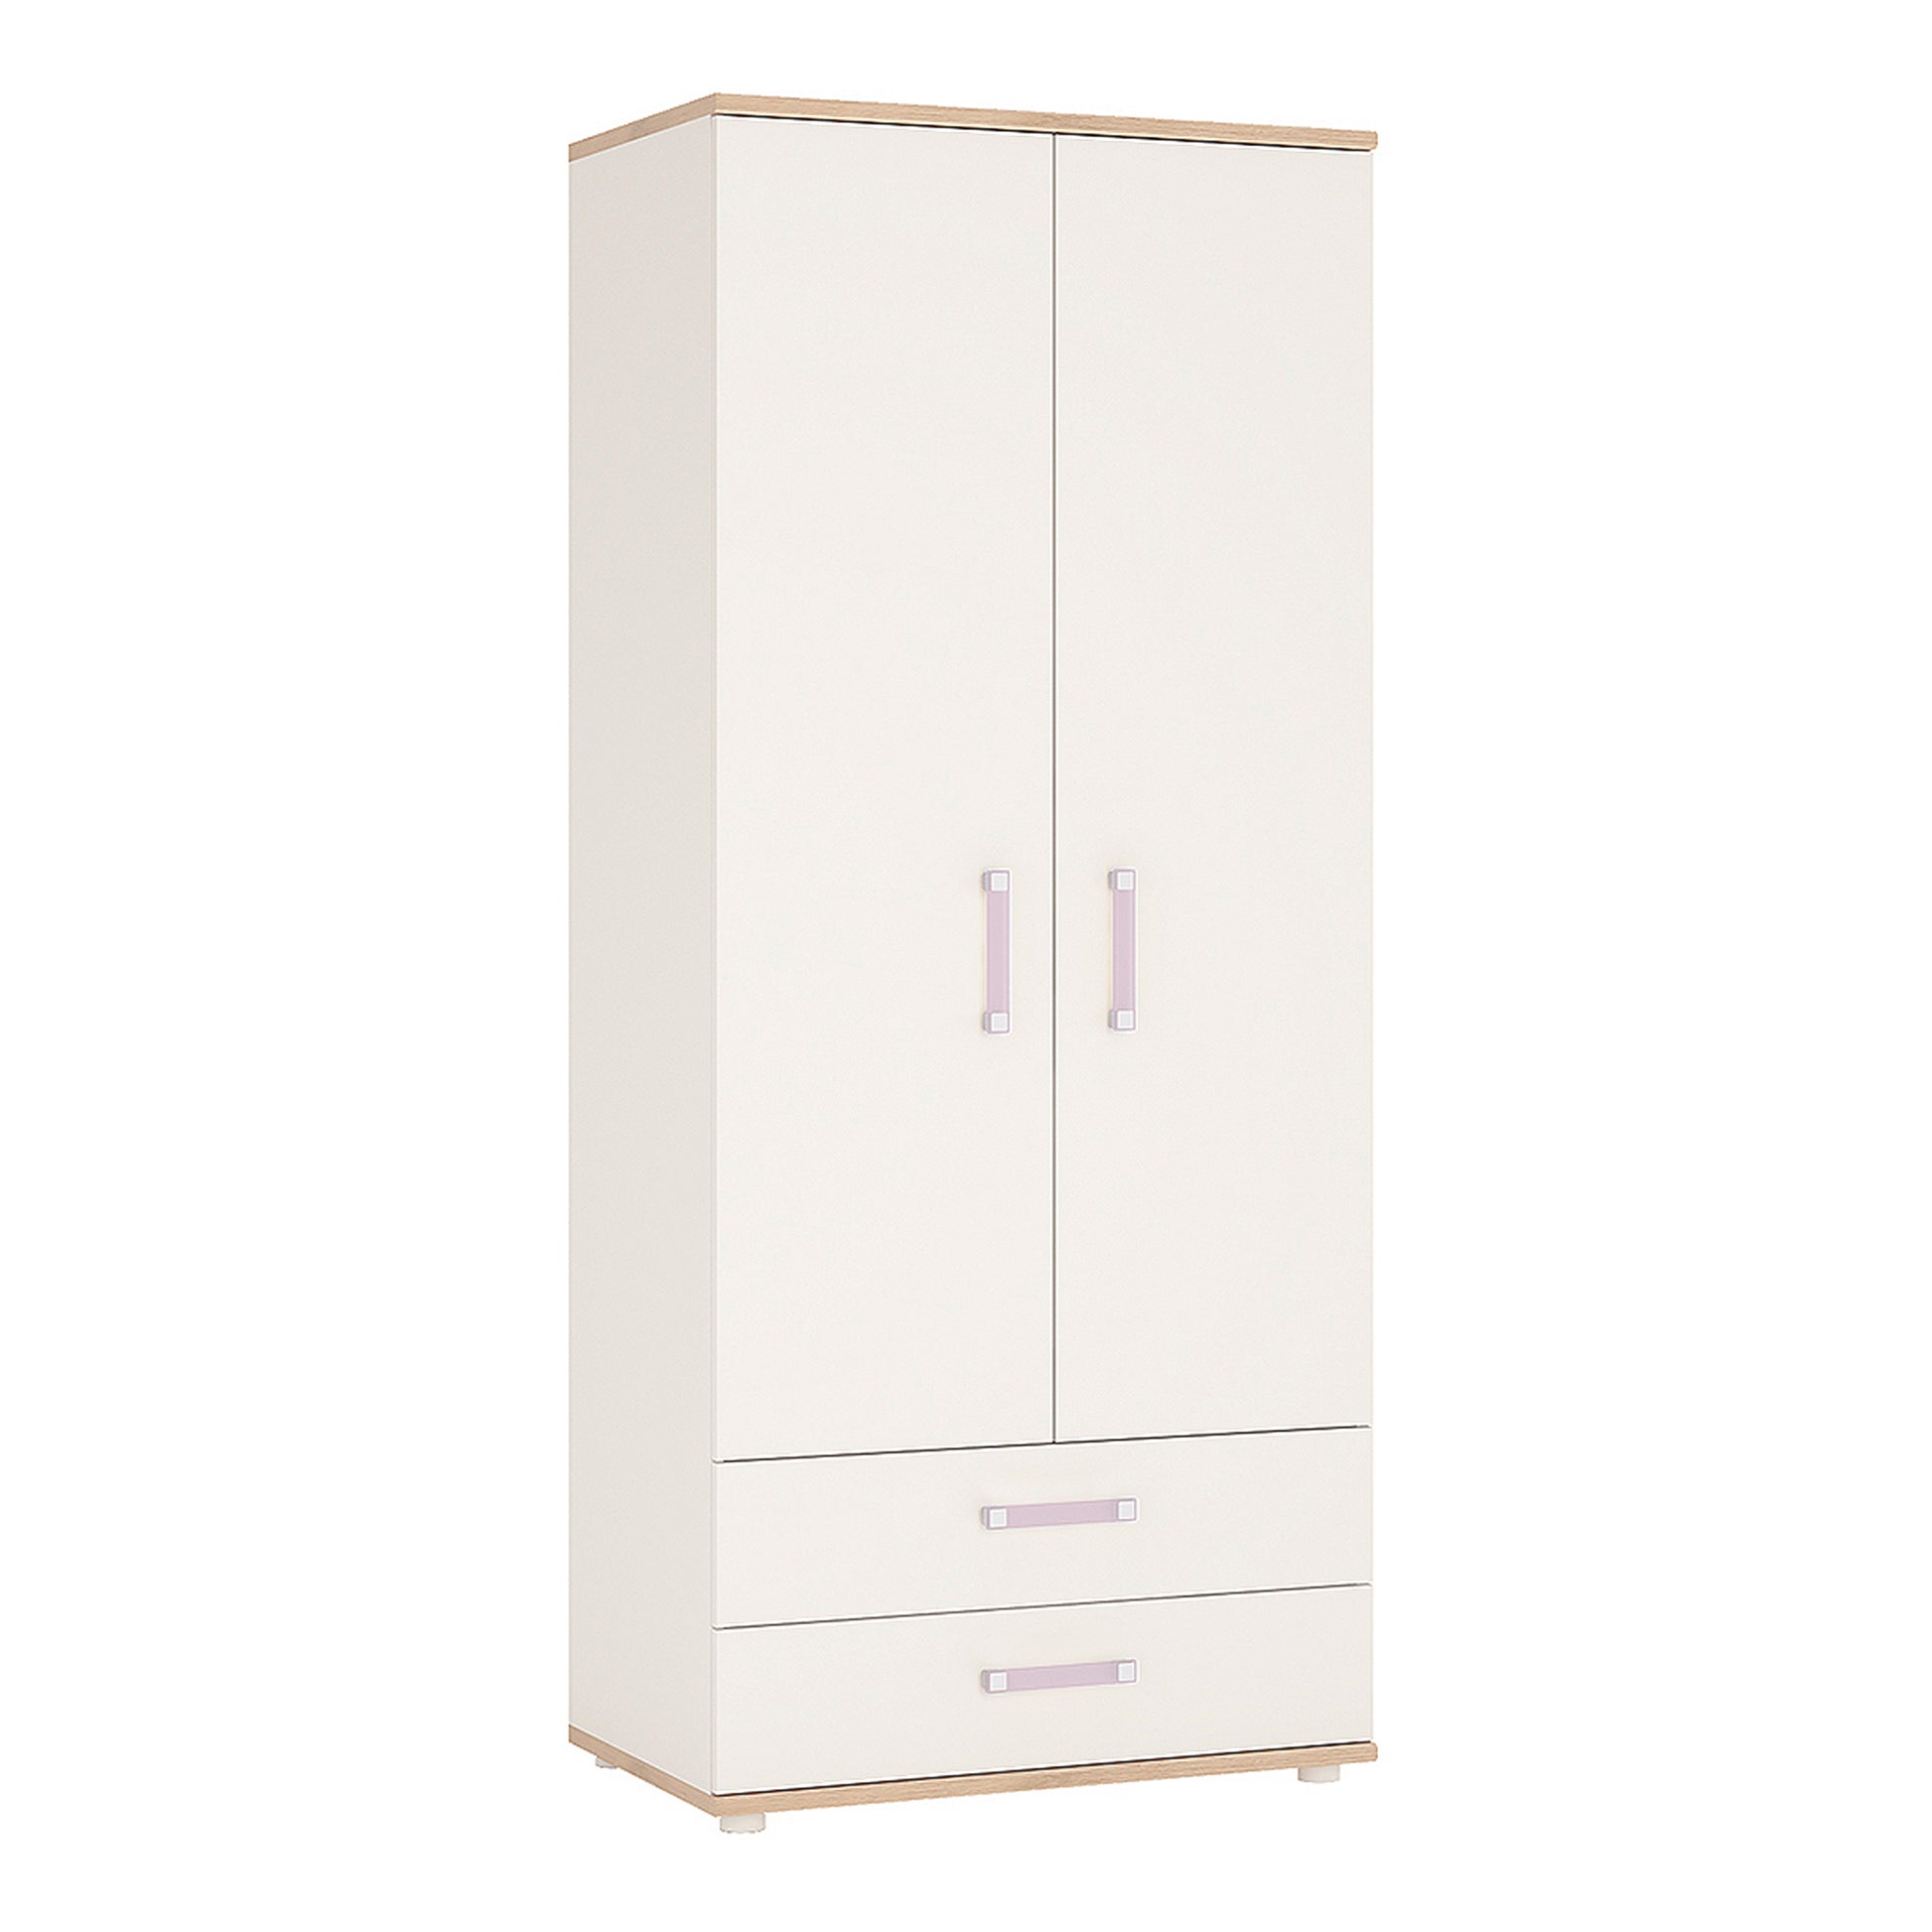 4Kids  2 Door 2 Drawer Wardrobe in Light Oak and white High Gloss (lilac handles)